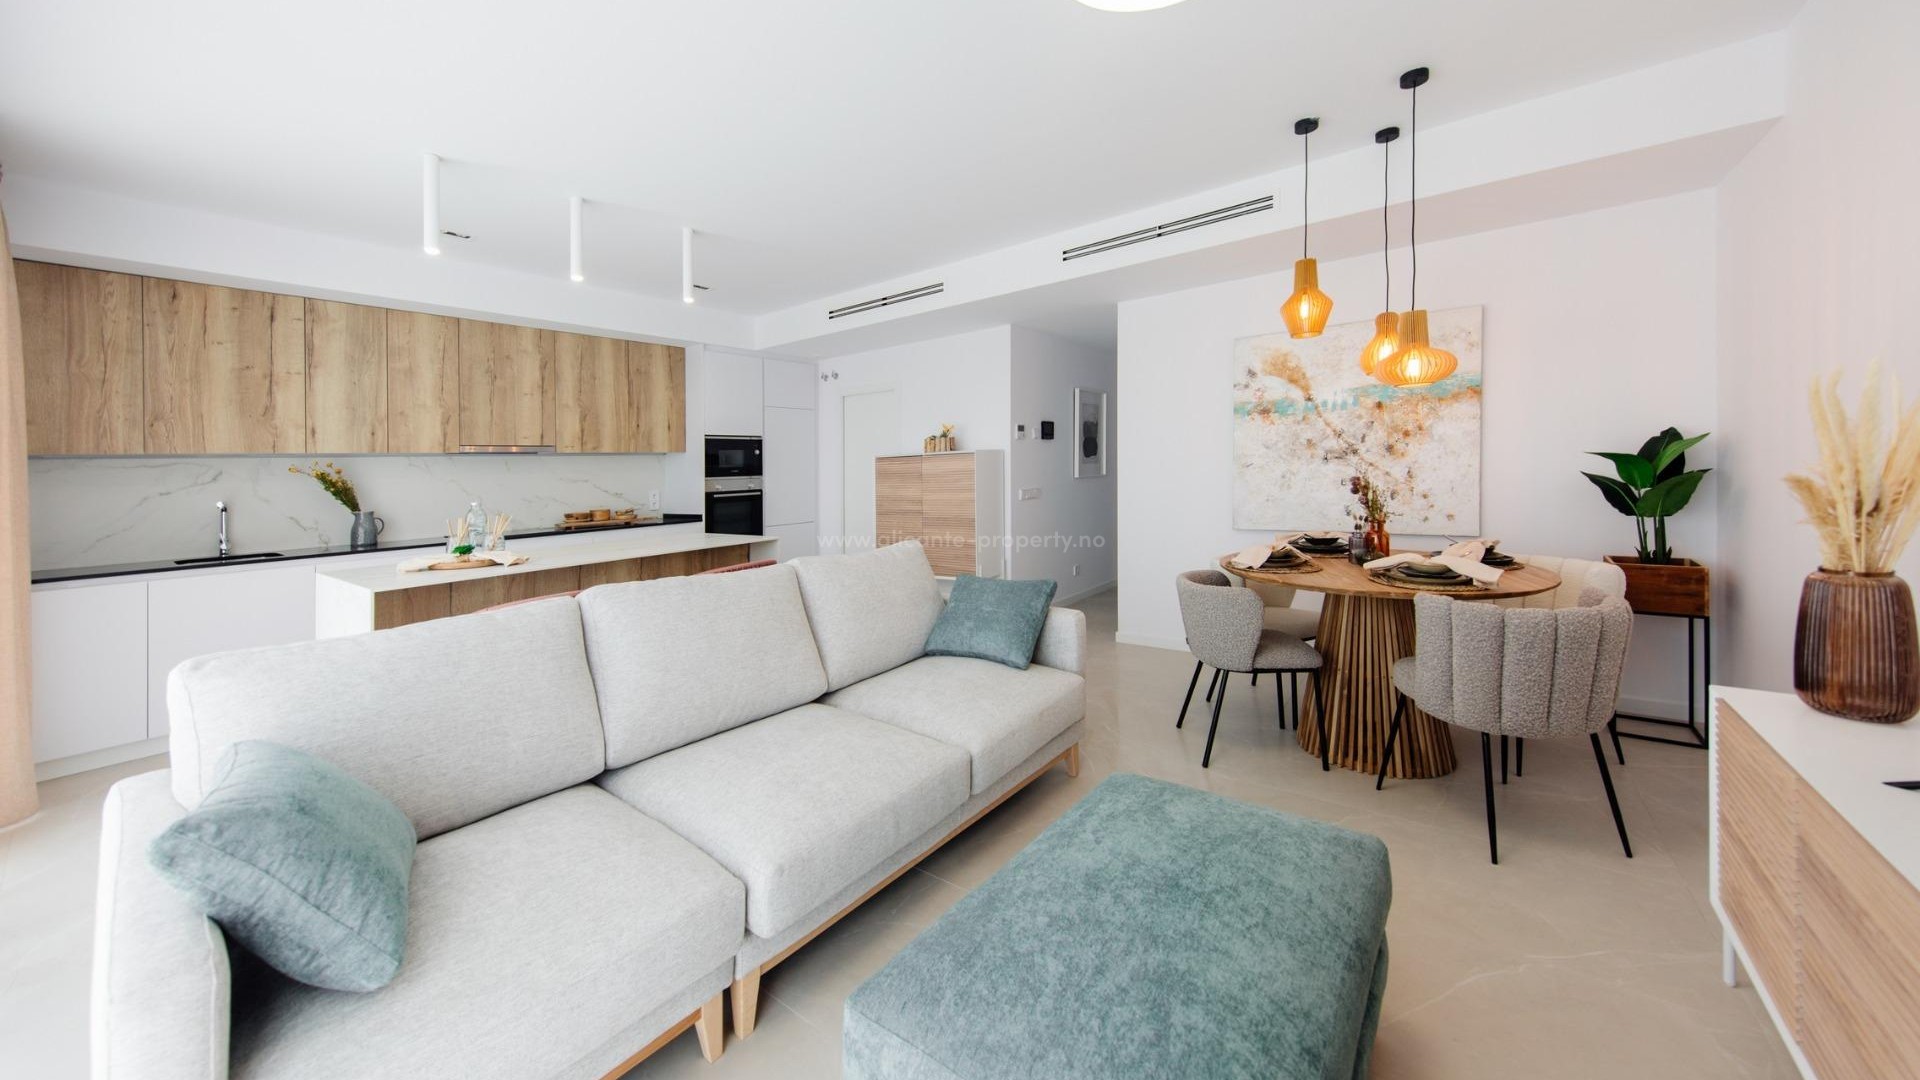 Apartment / flat in Camporrosso village